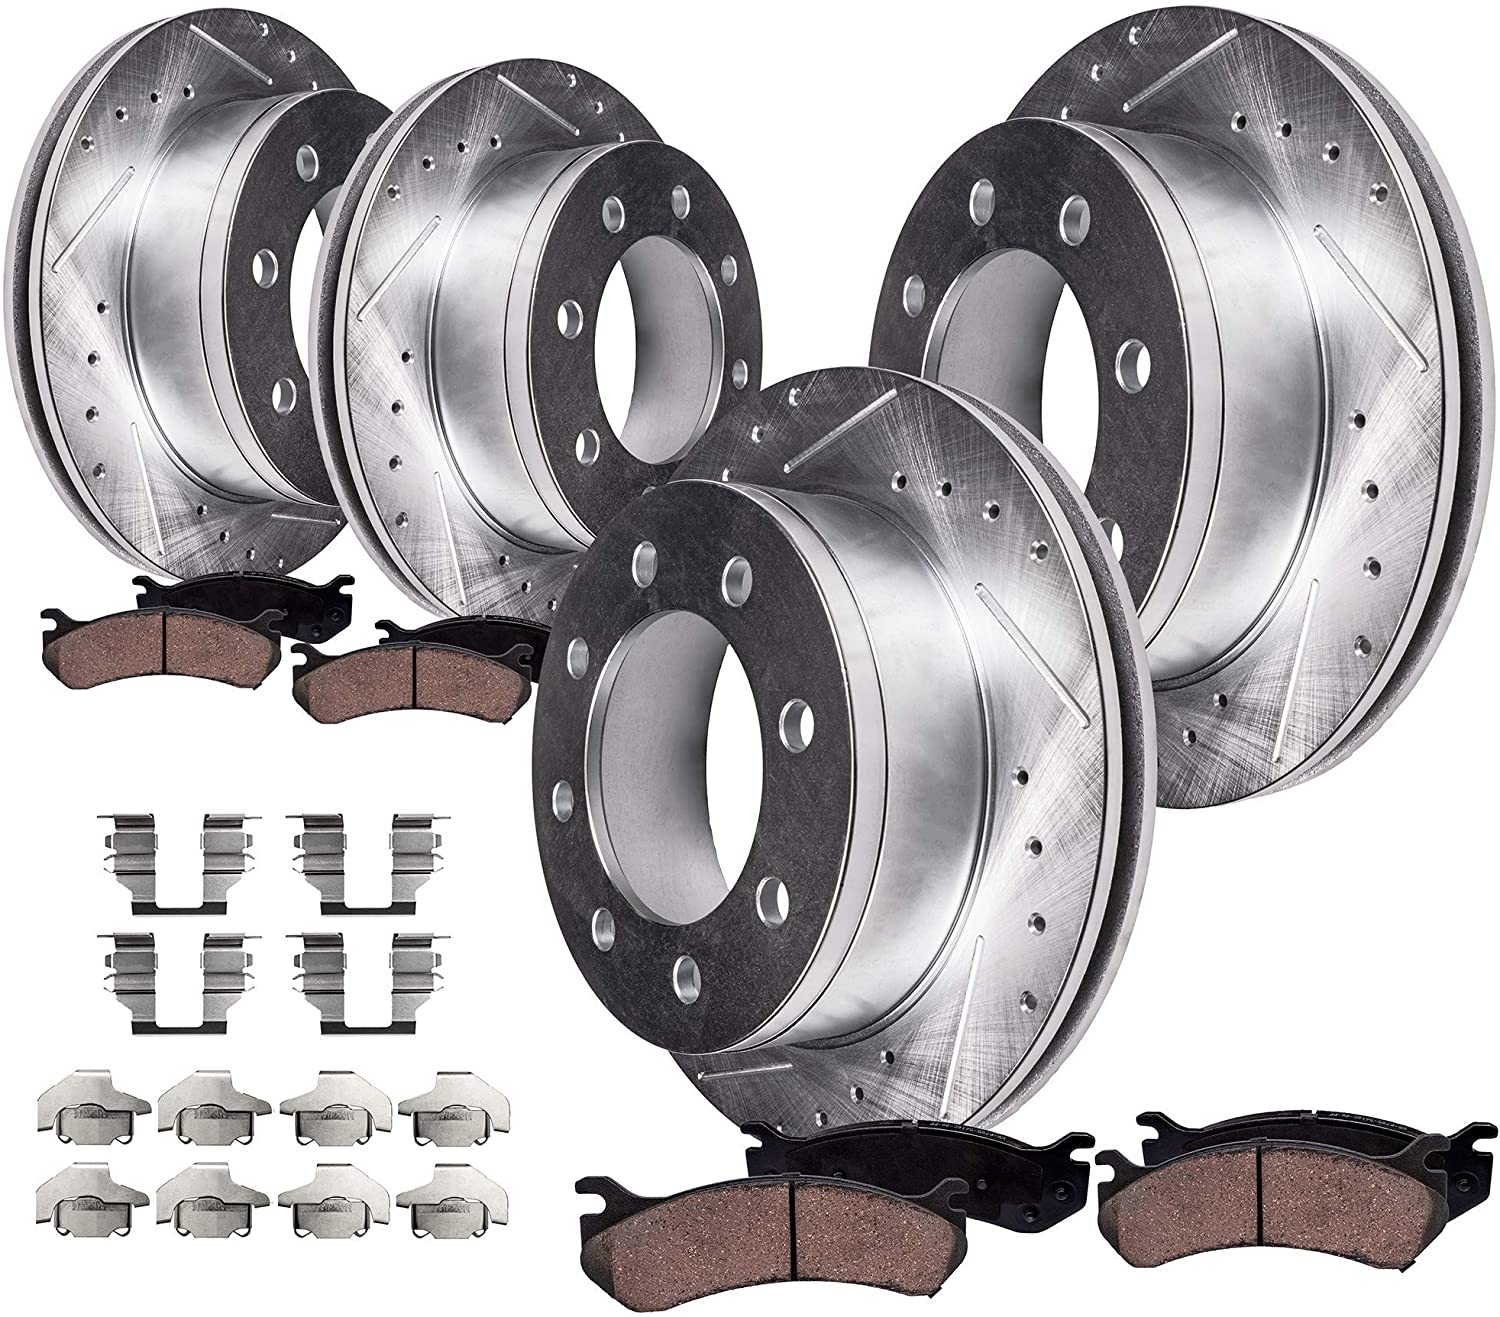 Detroit Axle - Front 331mm & Rear 326mm Drilled Slotted Brake Rotors Ceramic Pads w/Hardware for 2000-2005 Ford Excursion 4WD - [2000-2004 F-250 Super Duty 4WD] - 2000-2004 F-350 Super Duty 4WD SRW